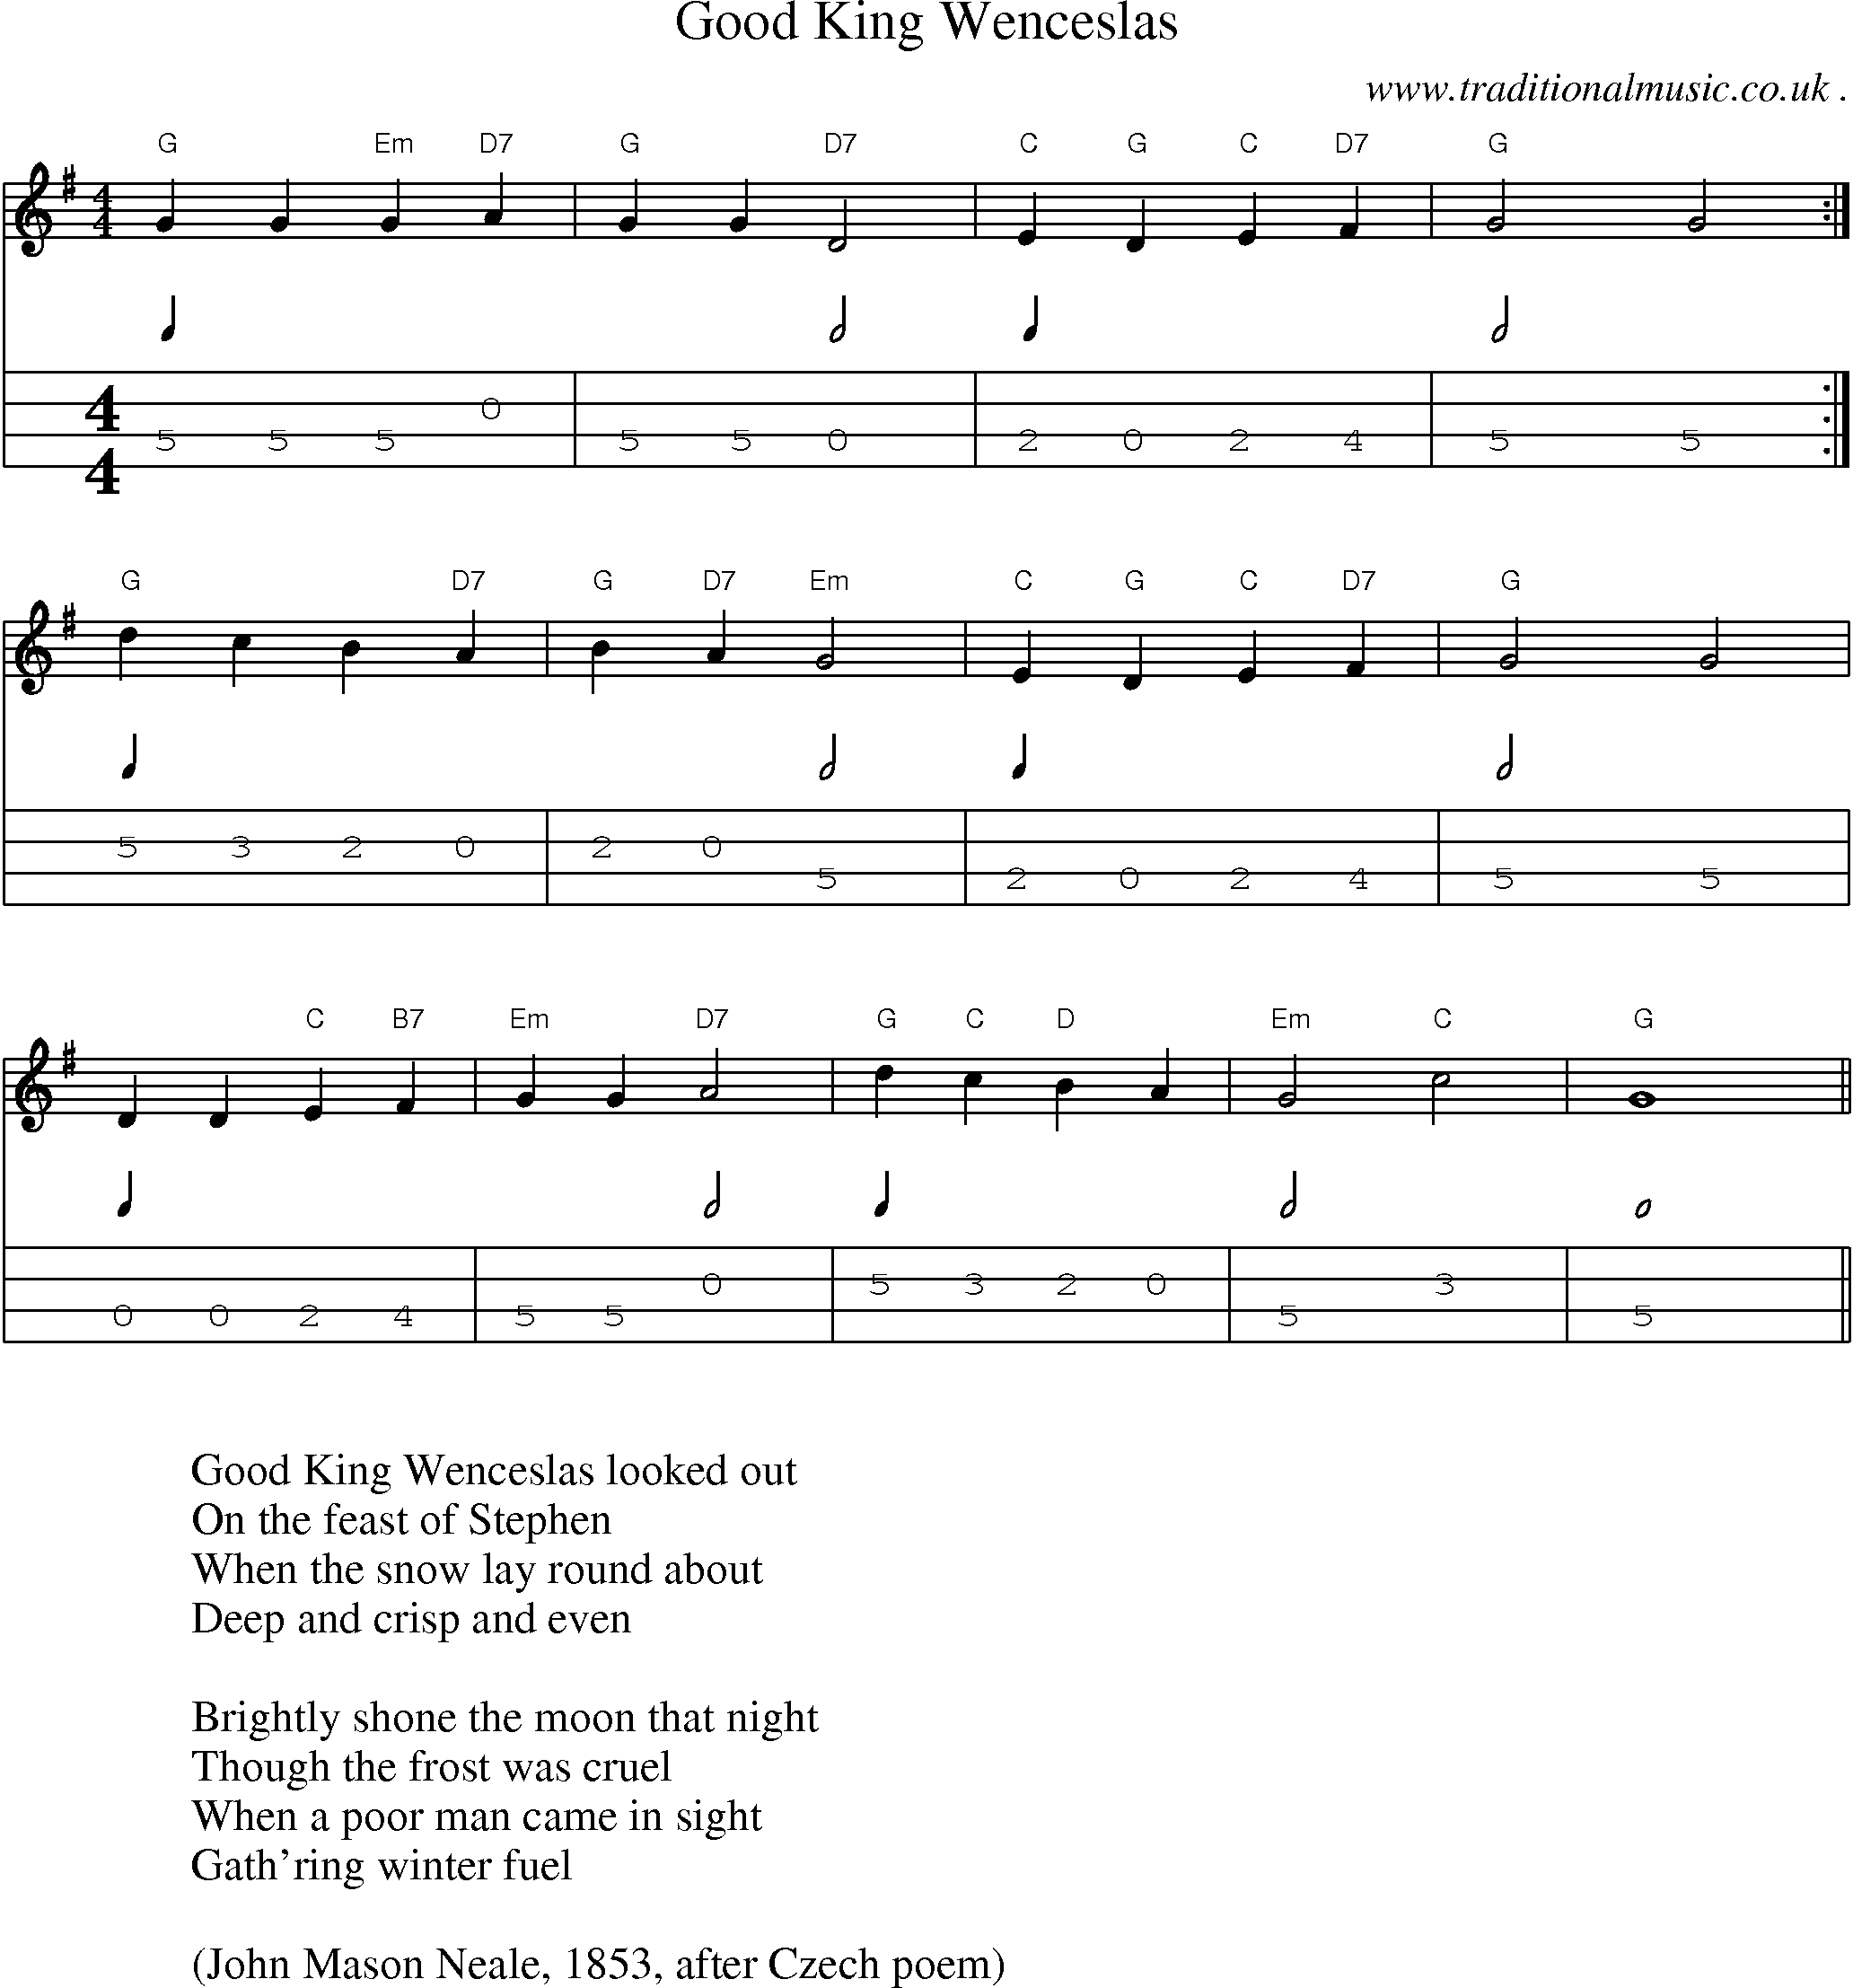 Music Score and Guitar Tabs for Good King Wenceslas